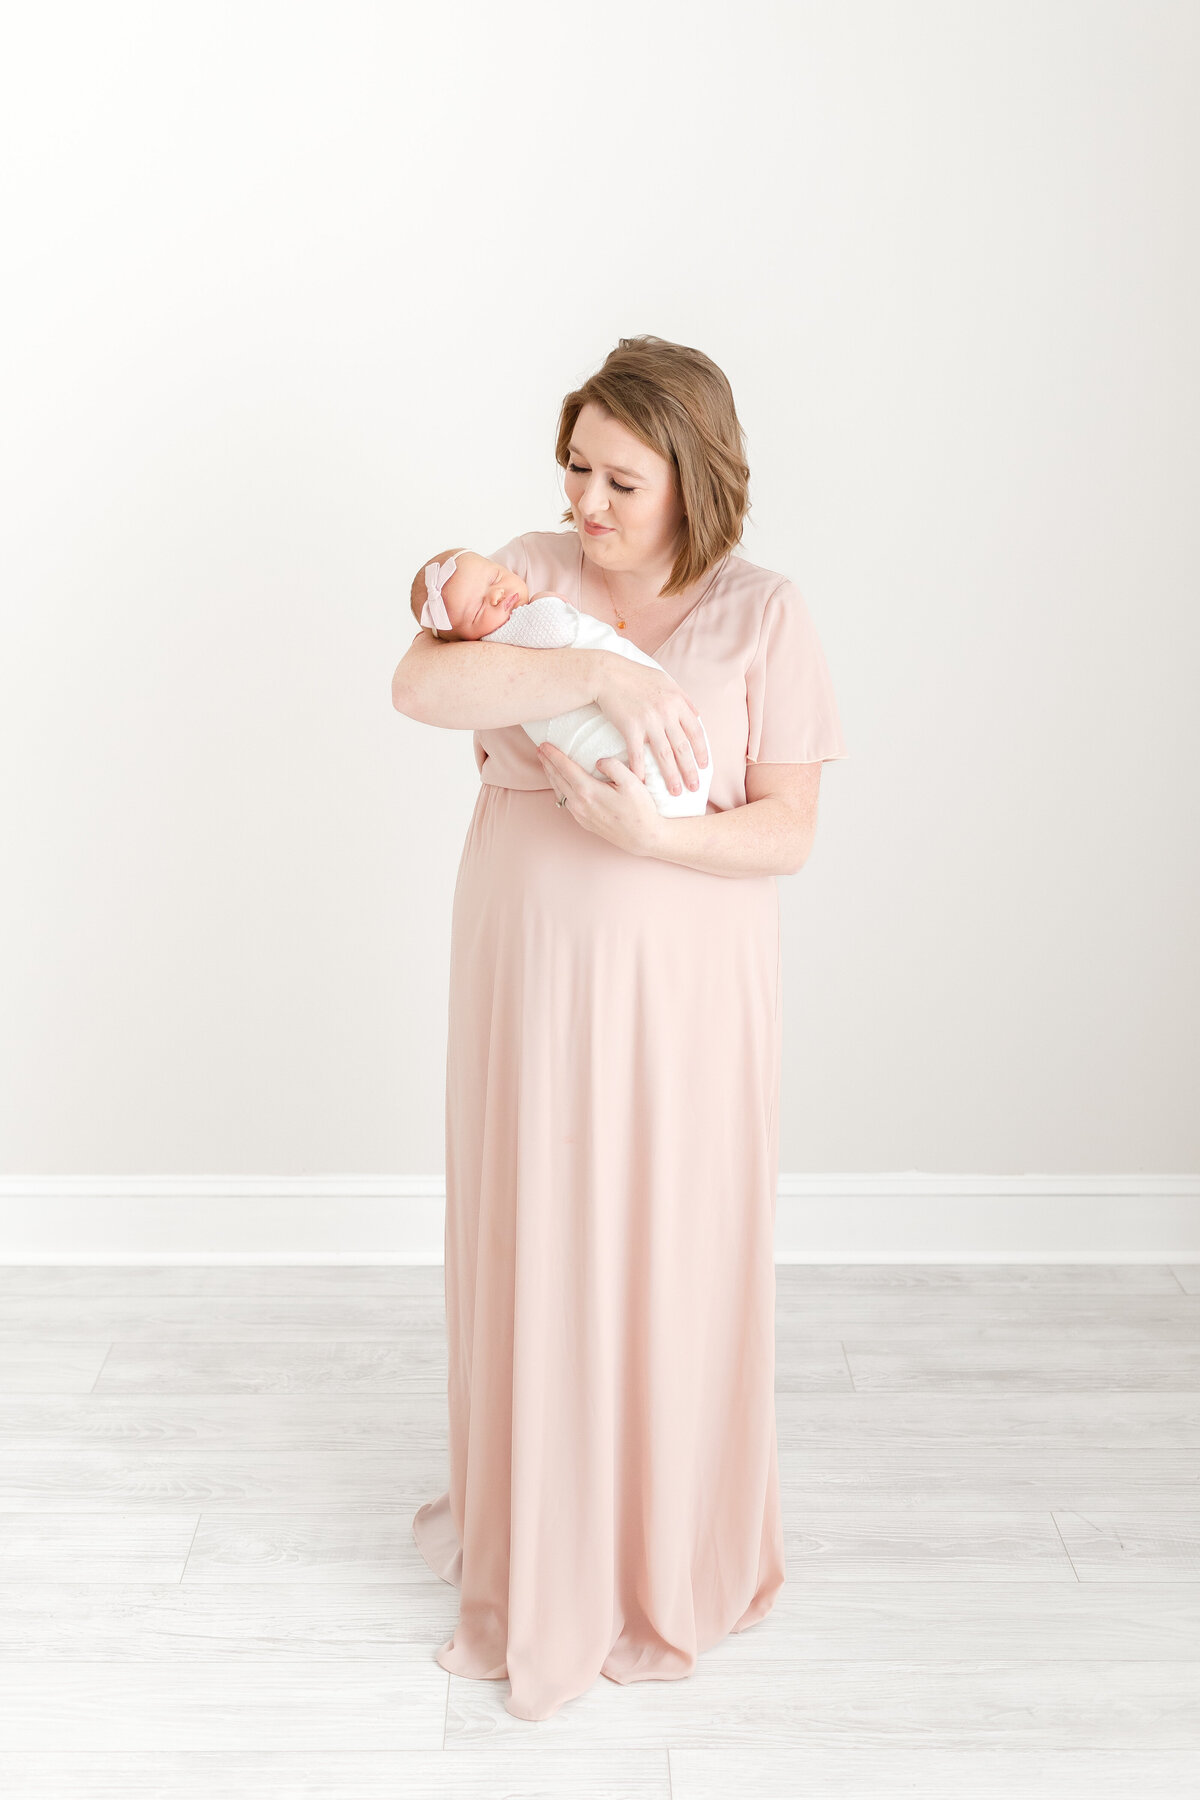 A mother wearing a long pink dress holding her newborn baby girl at her DC Newborn Photography photo session